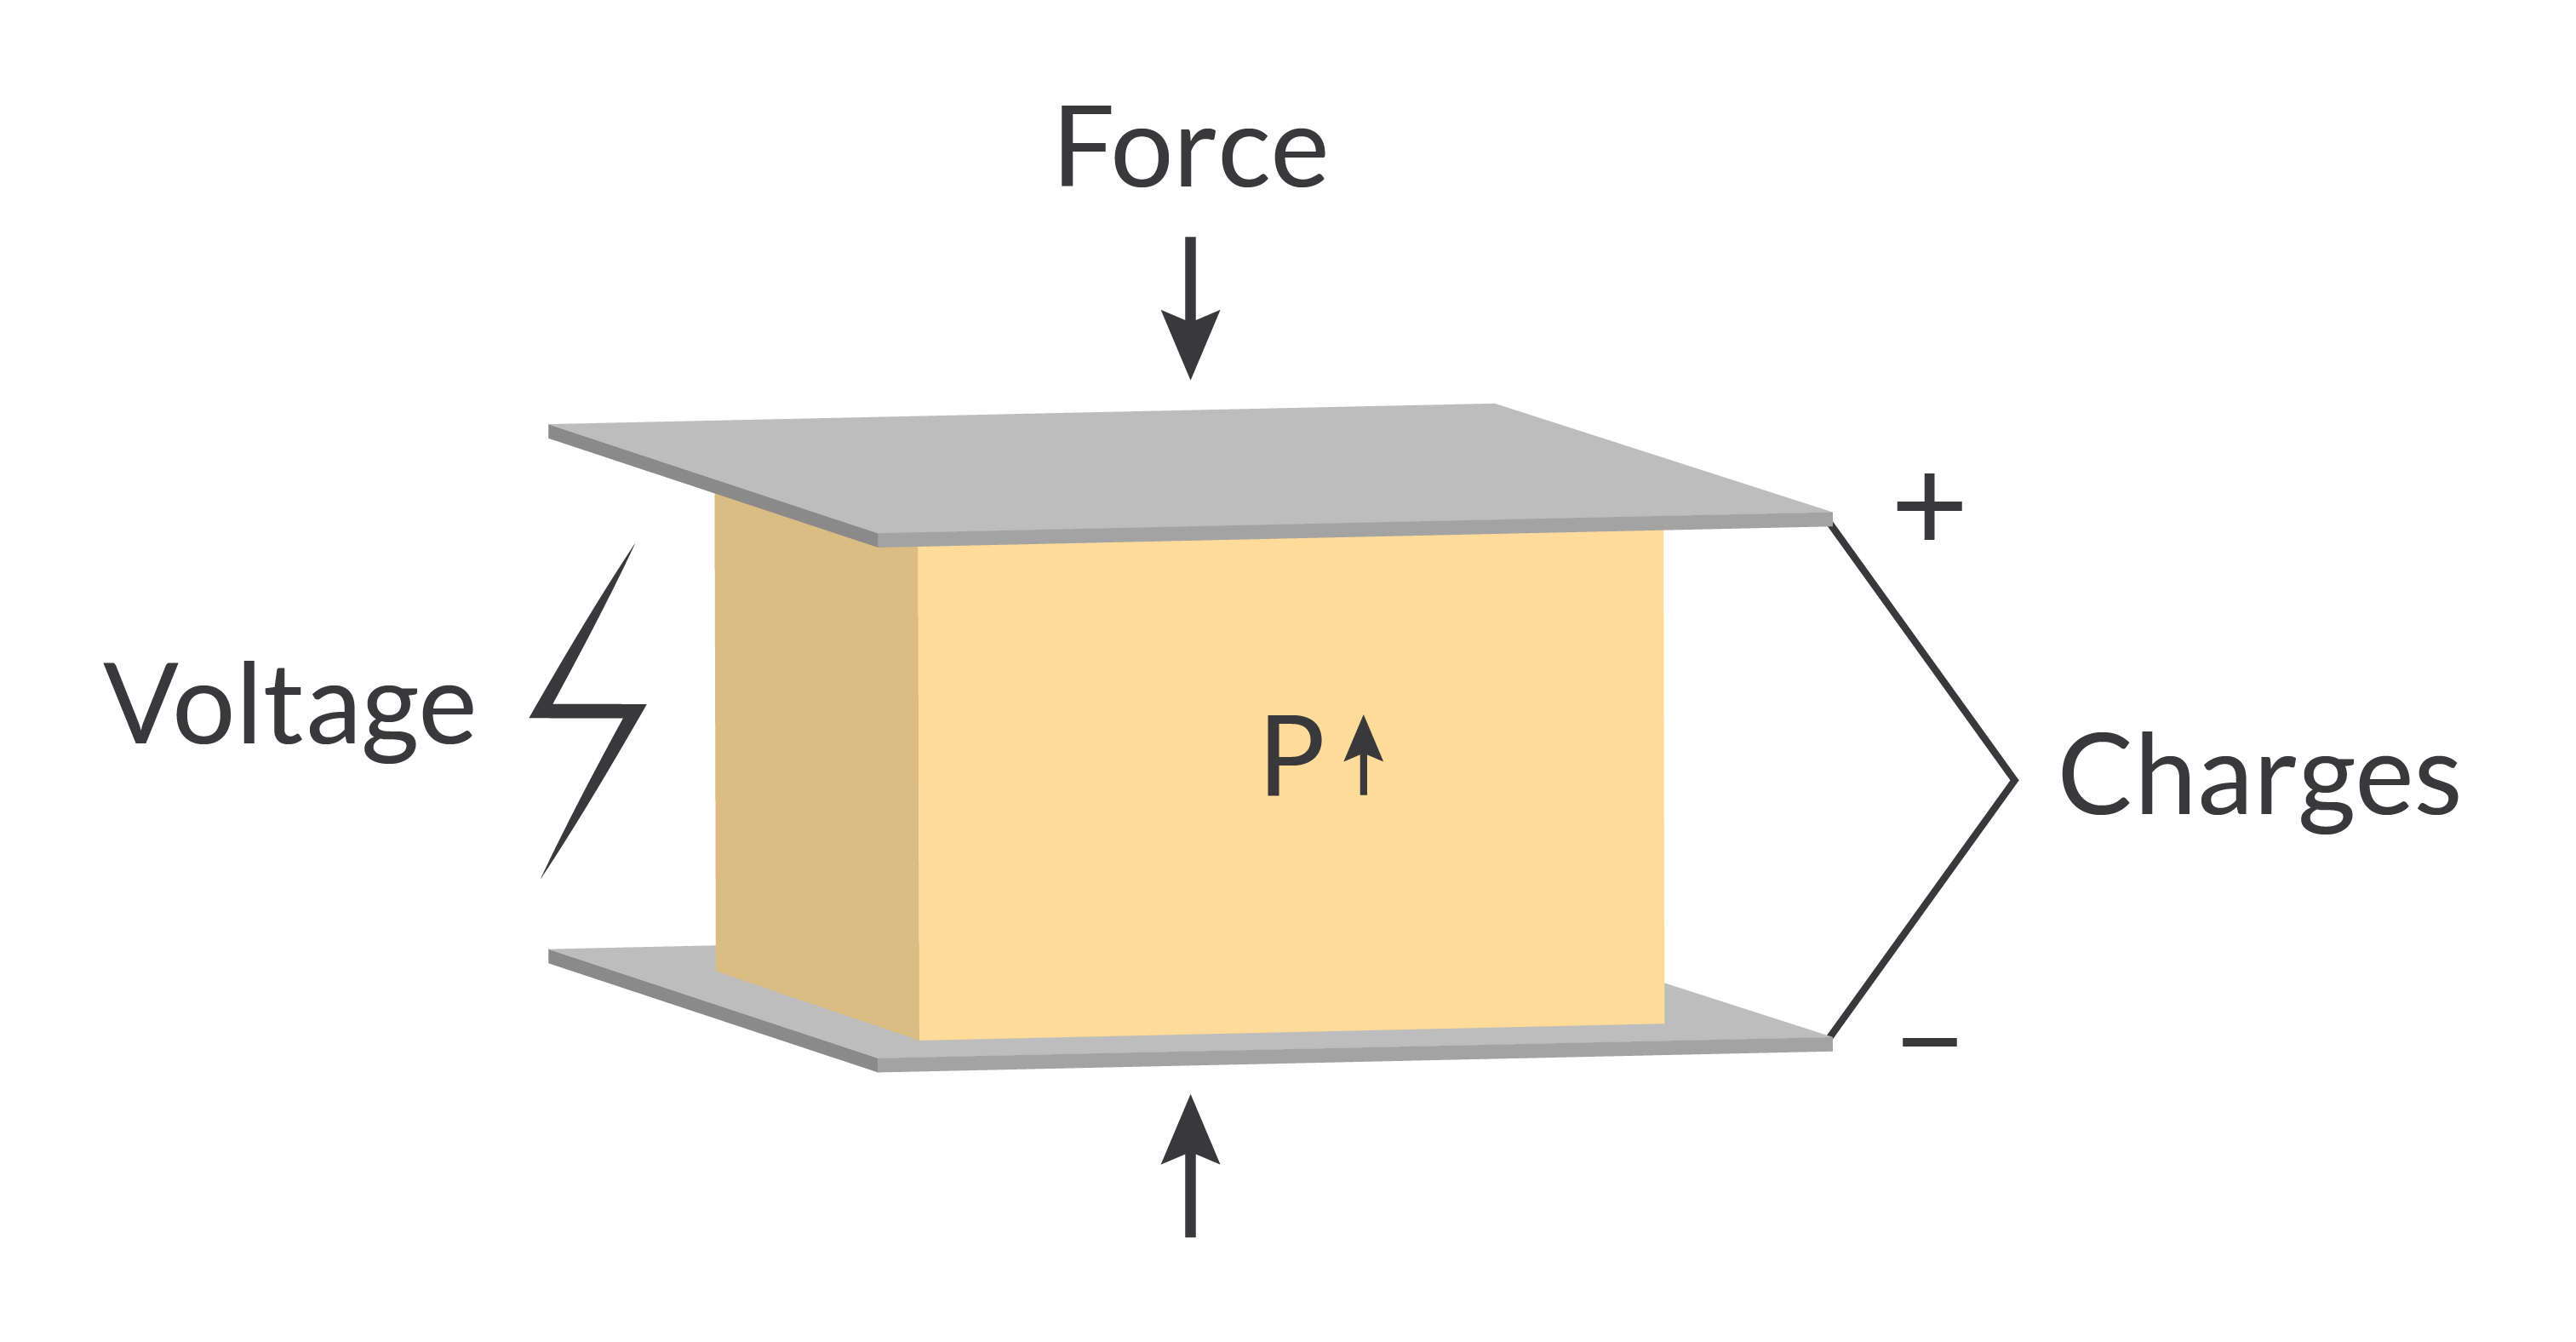 A diagram of piezoelectric transduction with voltage, force, and charges labeled.